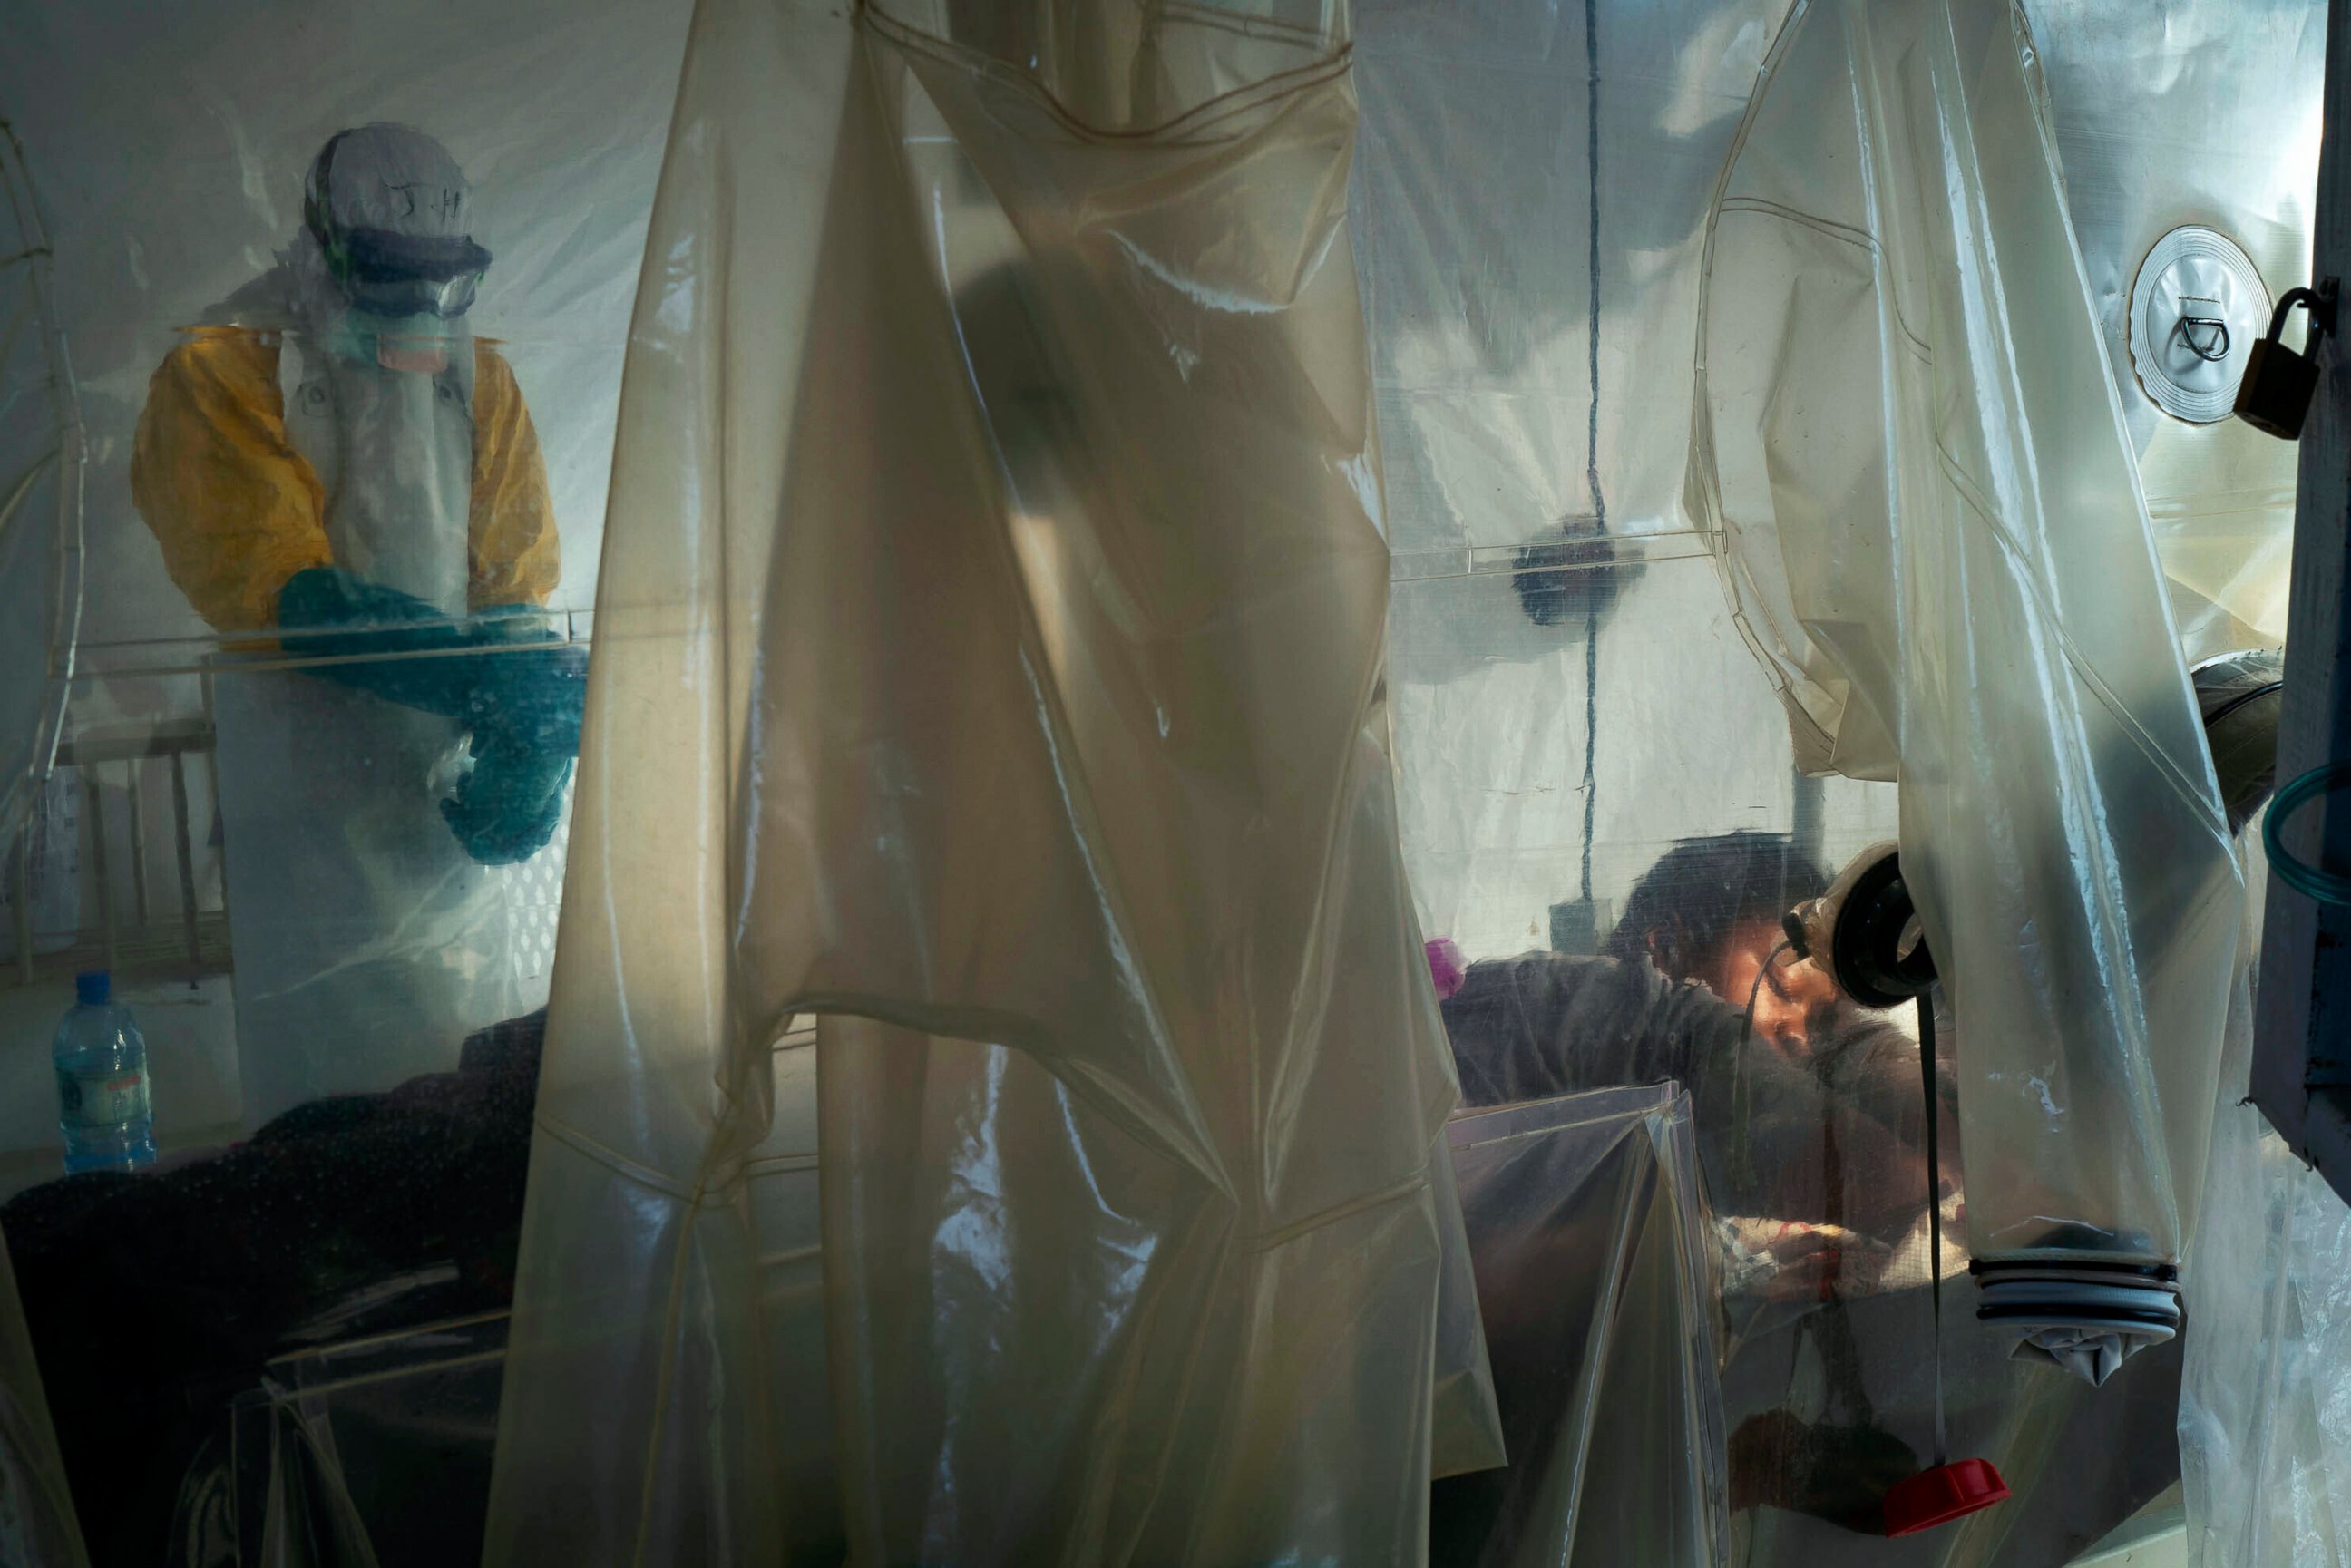 PHOTO: FILE - In this July 13, 2019 file photo, health workers wearing protective gear check on a patient isolated in a plastic cube at an Ebola treatment center in Beni, Congo.